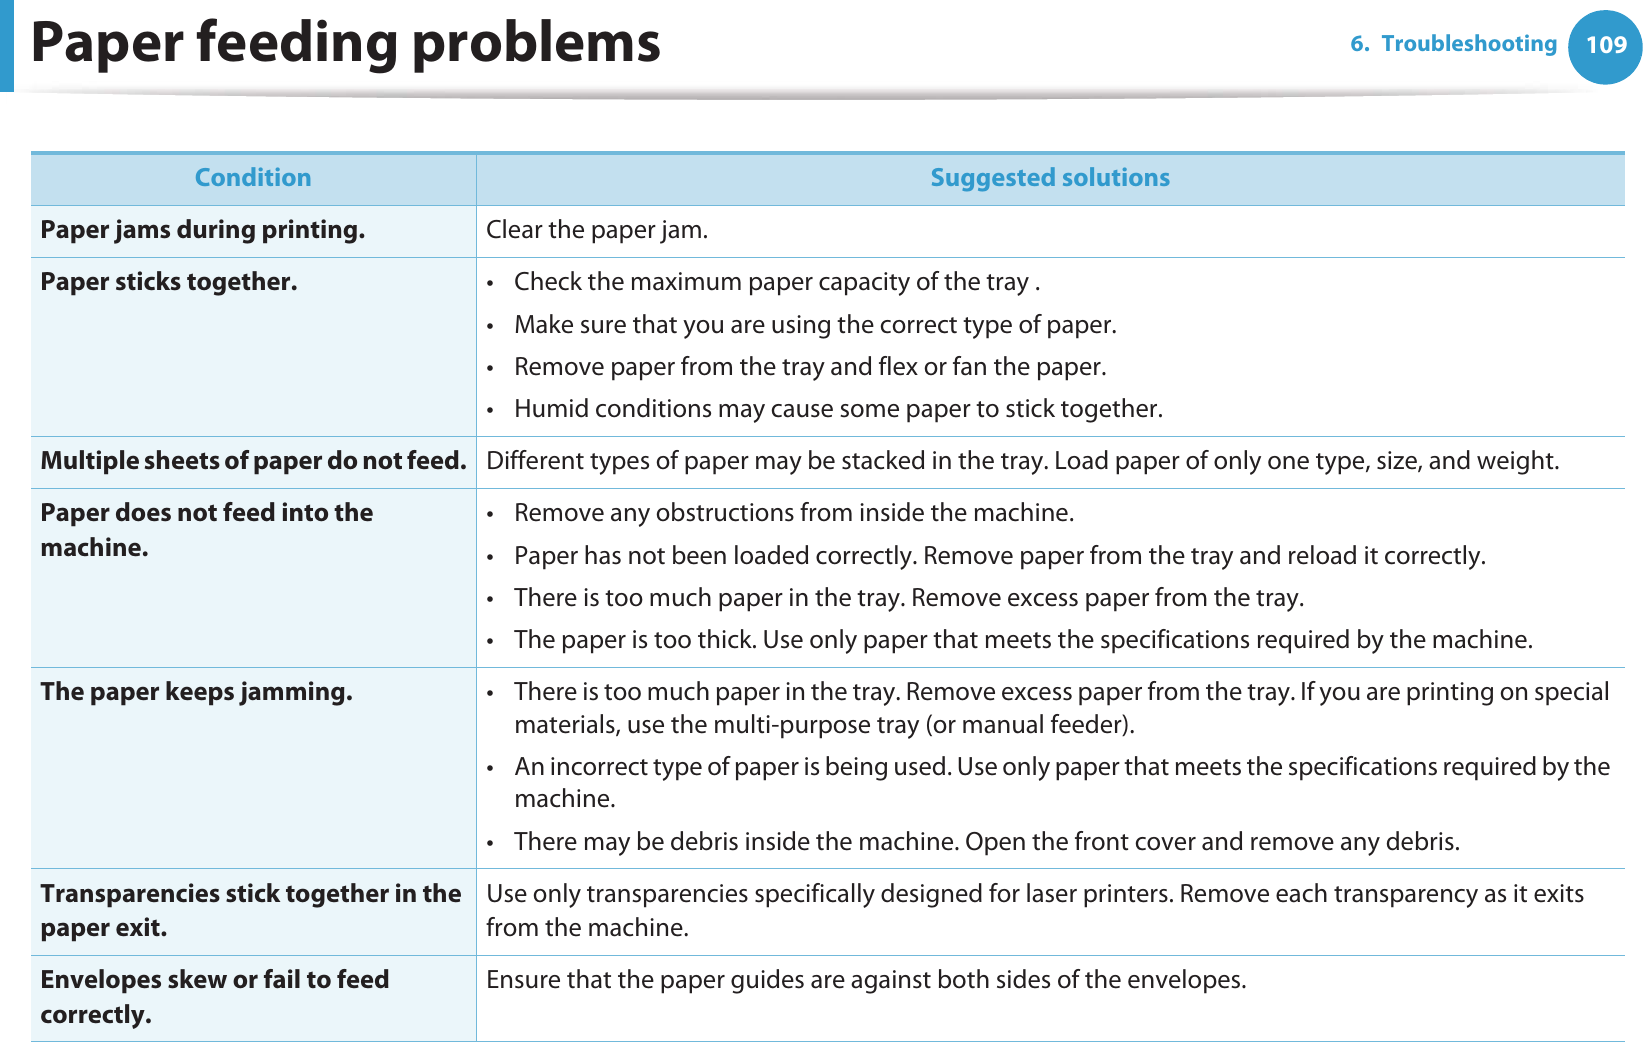 1096. TroubleshootingPaper feeding problems  Condition Suggested solutionsPaper jams during printing. Clear the paper jam.Paper sticks together. • Check the maximum paper capacity of the tray .• Make sure that you are using the correct type of paper.• Remove paper from the tray and flex or fan the paper.• Humid conditions may cause some paper to stick together.Multiple sheets of paper do not feed. Different types of paper may be stacked in the tray. Load paper of only one type, size, and weight.Paper does not feed into the machine.• Remove any obstructions from inside the machine.• Paper has not been loaded correctly. Remove paper from the tray and reload it correctly.• There is too much paper in the tray. Remove excess paper from the tray.• The paper is too thick. Use only paper that meets the specifications required by the machine.The paper keeps jamming. • There is too much paper in the tray. Remove excess paper from the tray. If you are printing on special materials, use the multi-purpose tray (or manual feeder).• An incorrect type of paper is being used. Use only paper that meets the specifications required by the machine.• There may be debris inside the machine. Open the front cover and remove any debris.Transparencies stick together in the paper exit.Use only transparencies specifically designed for laser printers. Remove each transparency as it exits from the machine.Envelopes skew or fail to feed correctly.Ensure that the paper guides are against both sides of the envelopes.